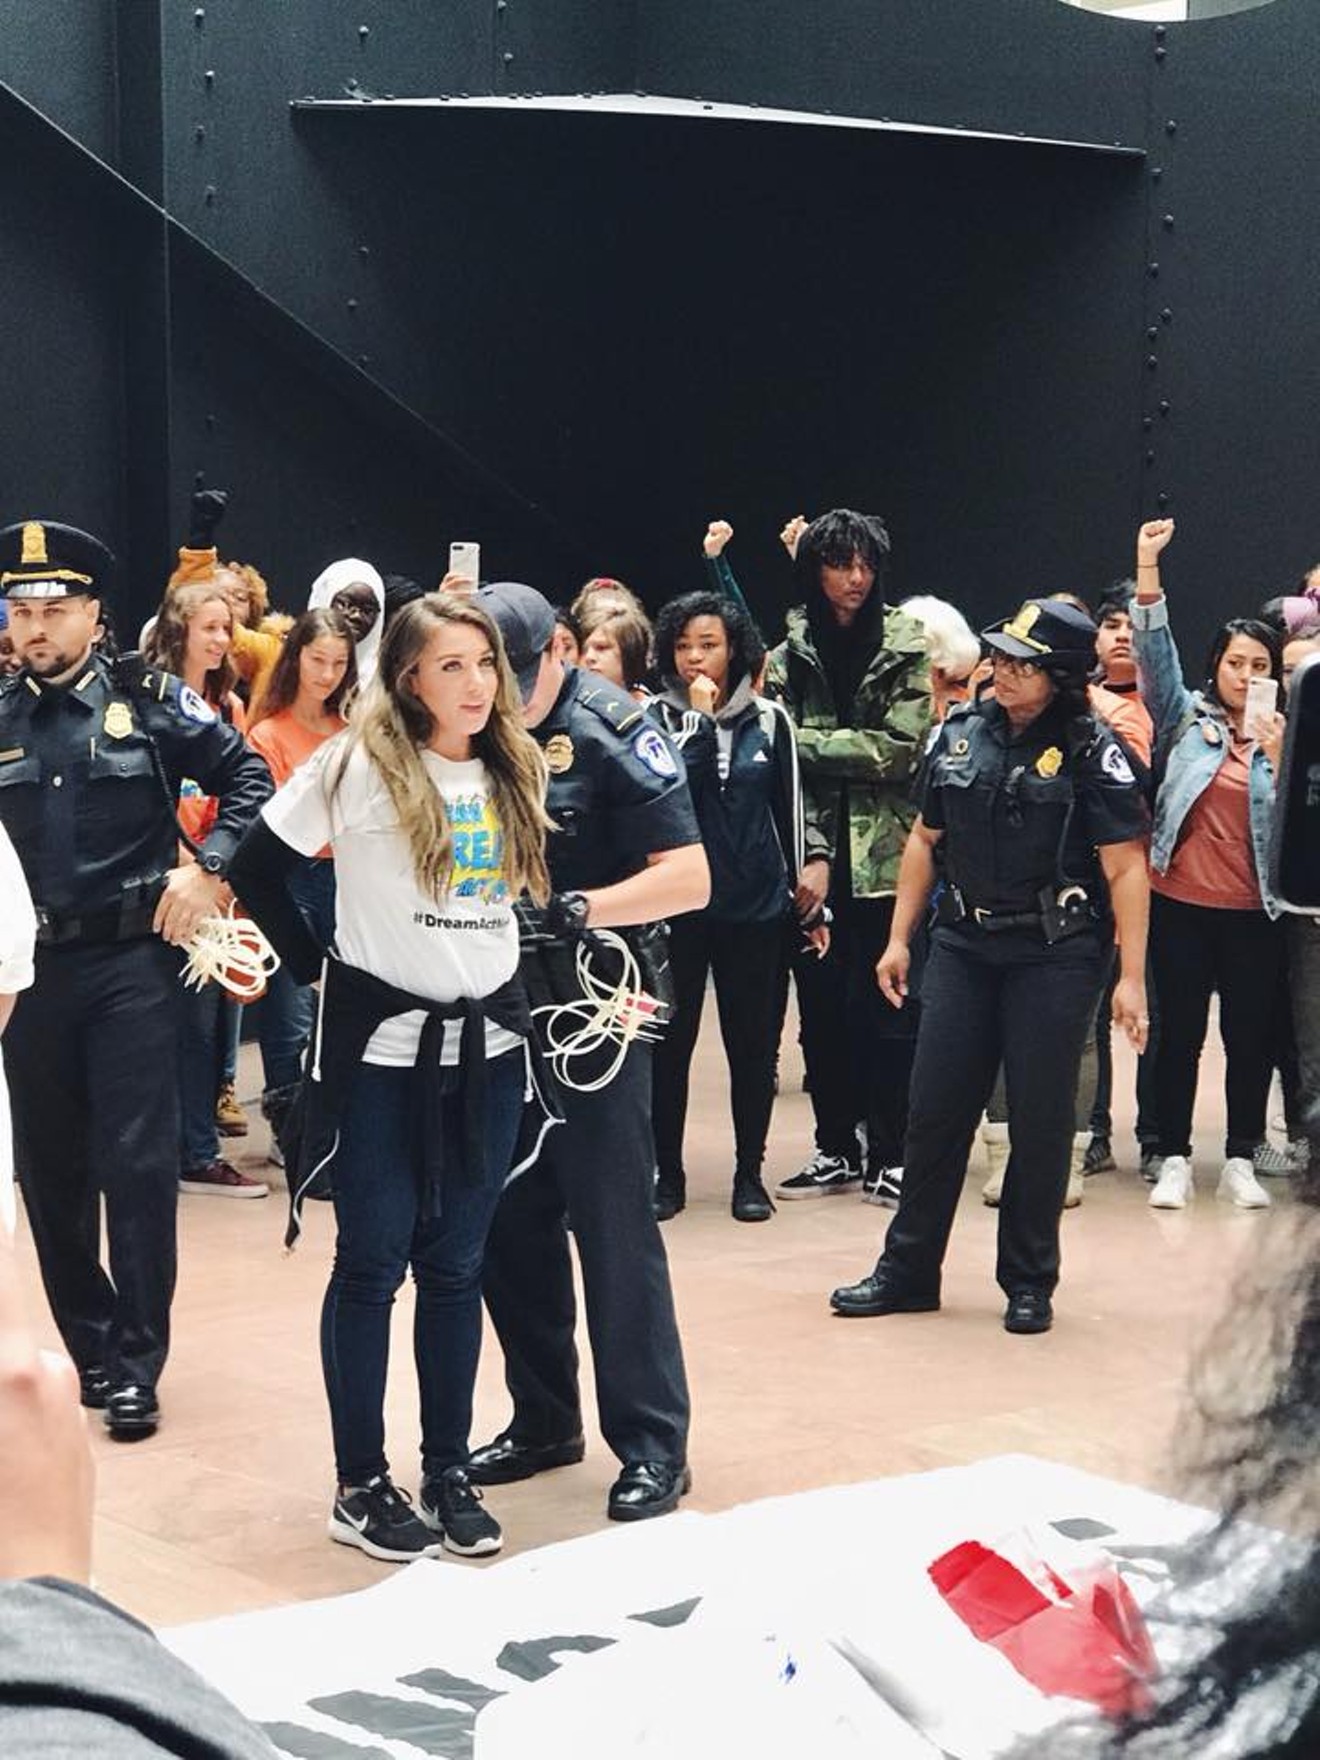 ASU senior Belén Sisa was one of 14 people arrested on November 9 during a Clean Dream Act protest in Washington, D.C.